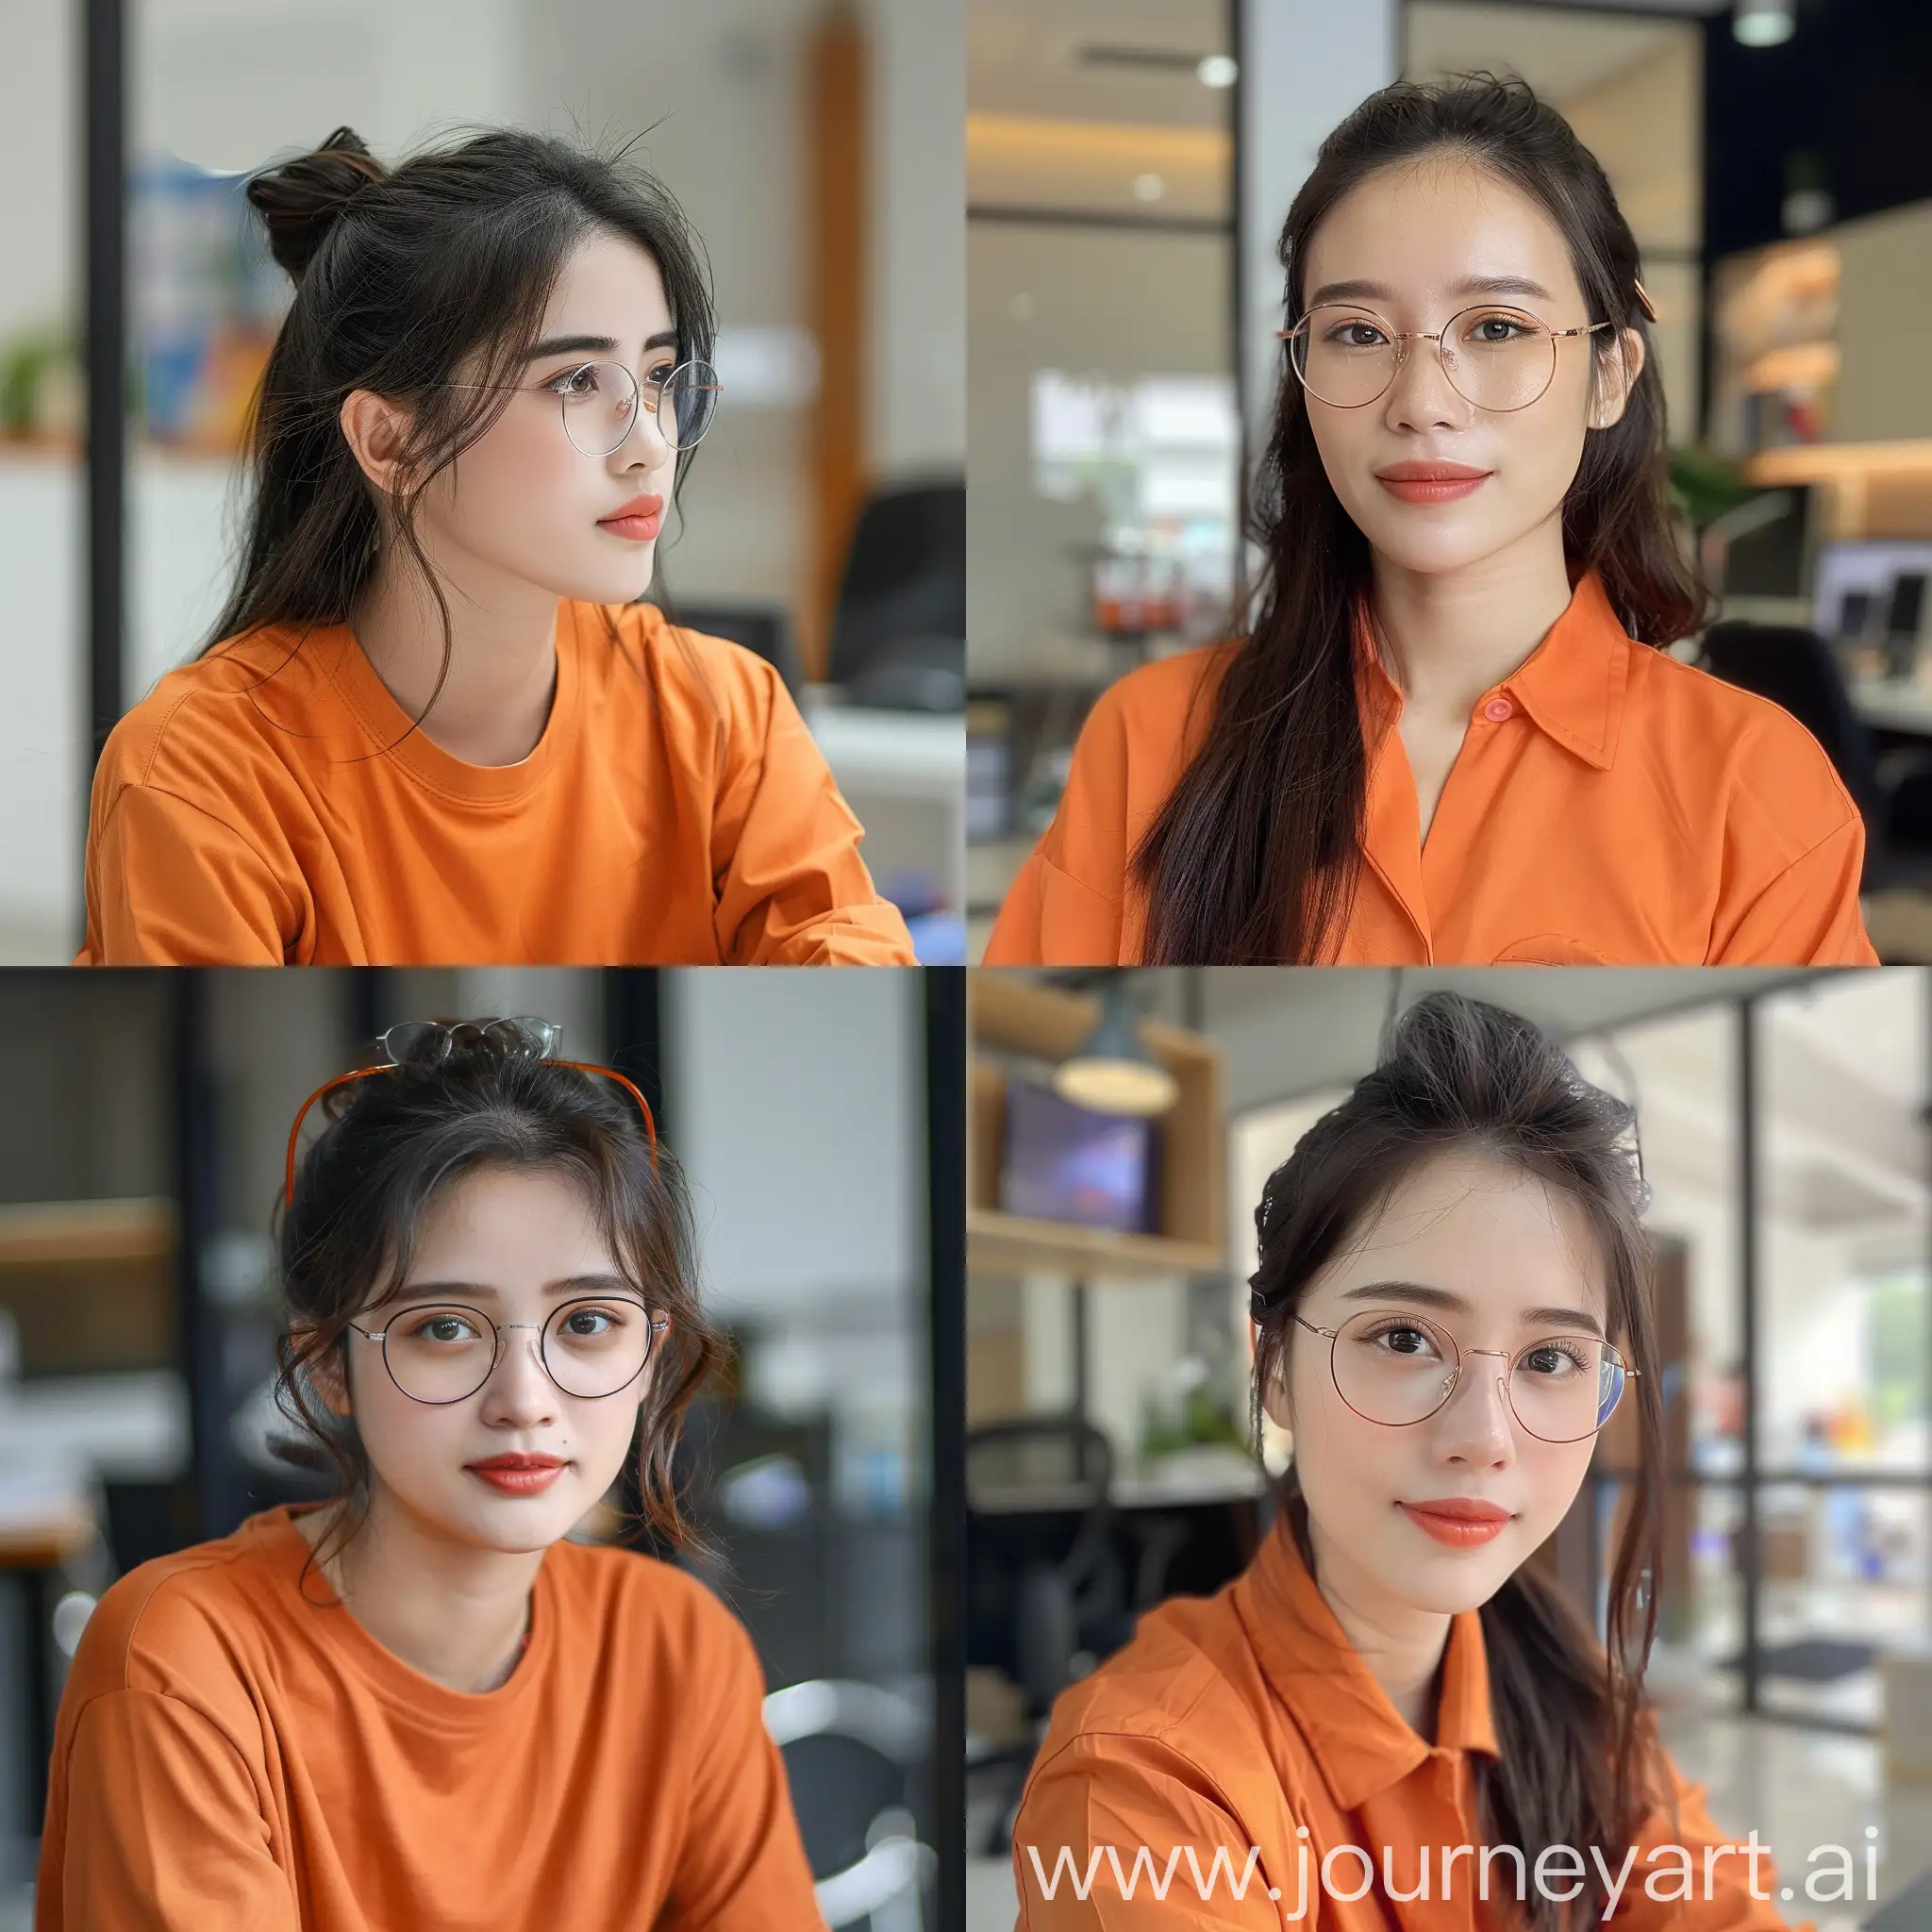 Vietnamese-Office-Worker-in-Vibrant-Orange-Shirt-with-Glasses-and-Hairclip